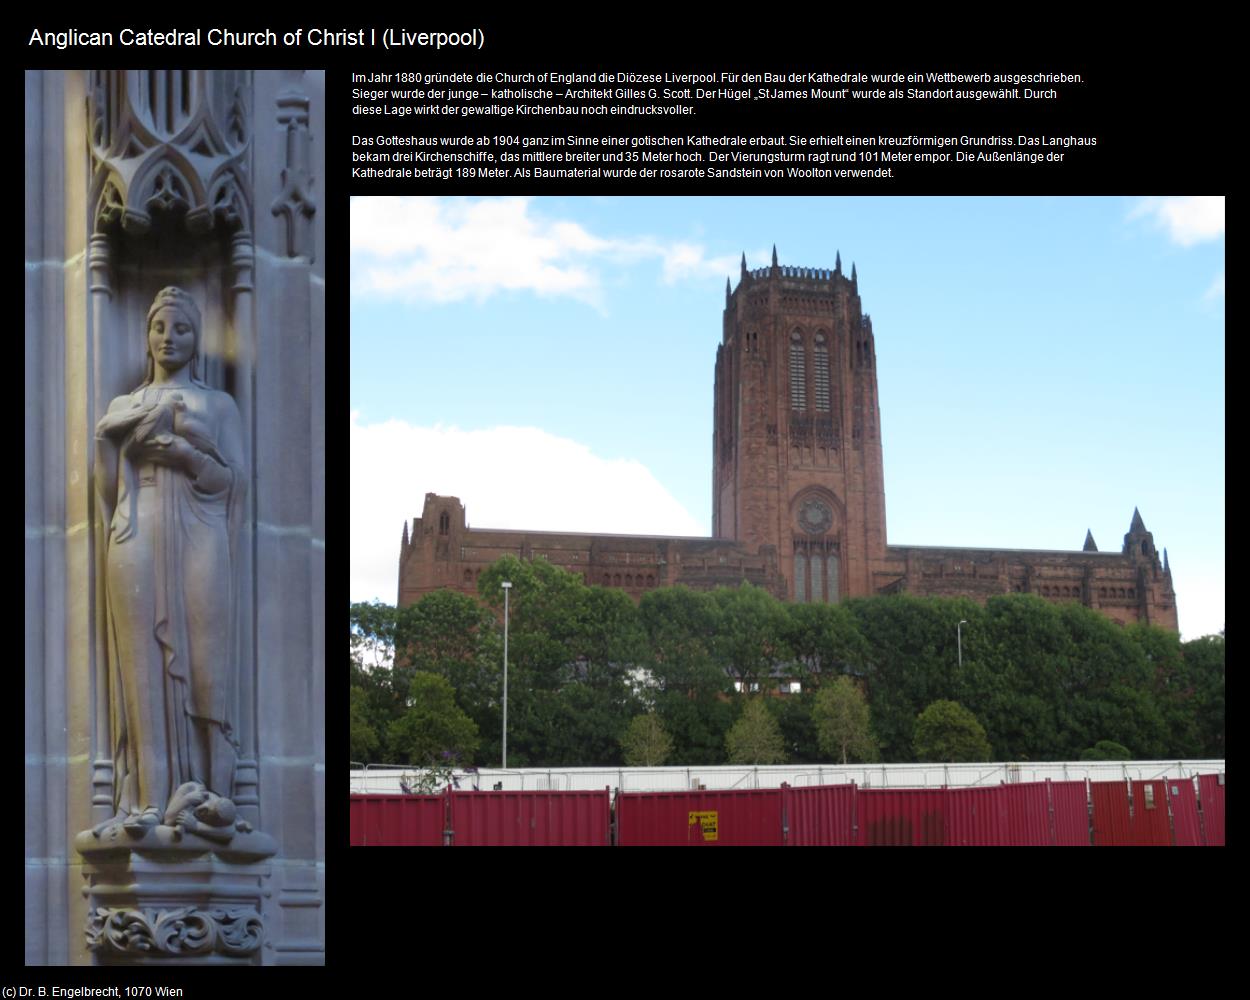 Anglican Catedral Church of Christ I   (Liverpool, England) in Kulturatlas-ENGLAND und WALES